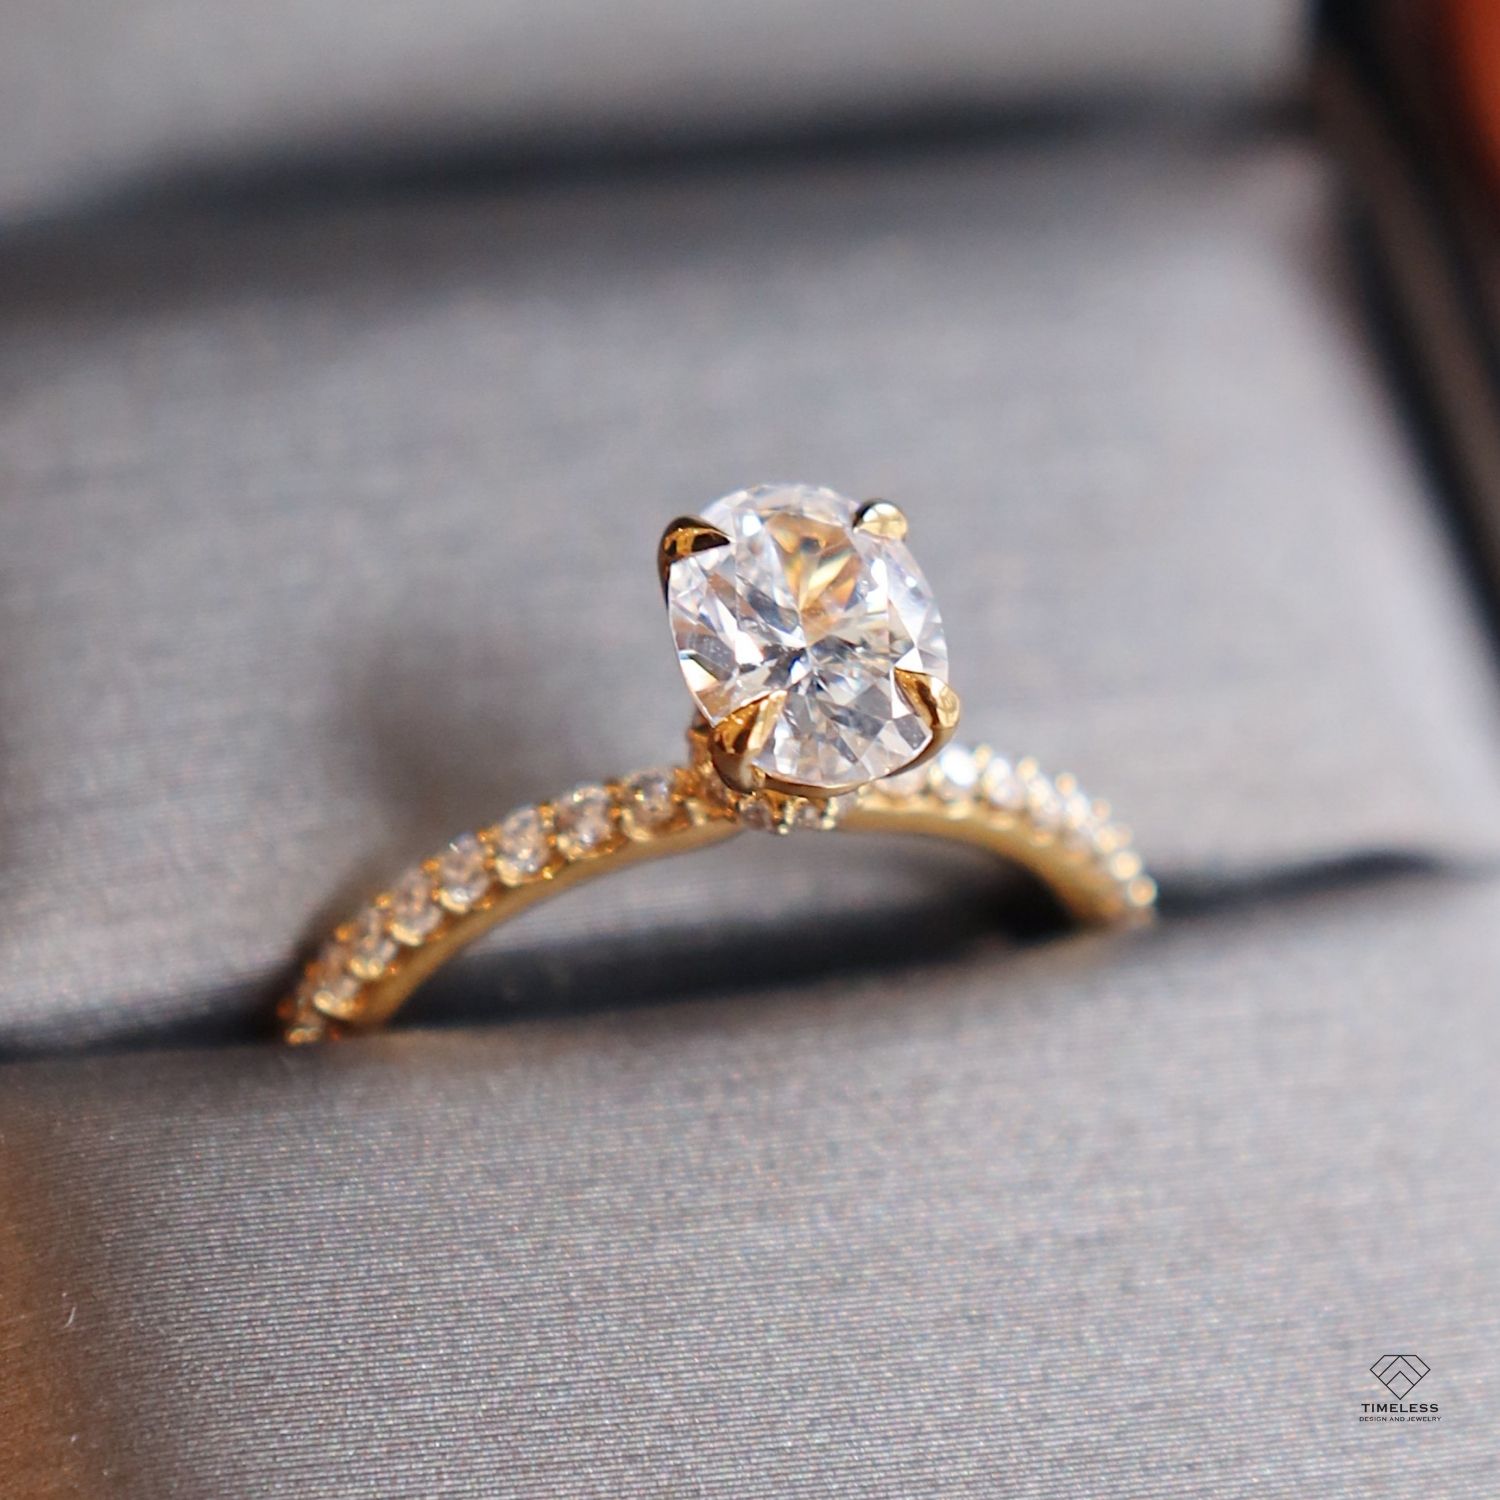 Custom Oval Cut Diamond & Gold Engagement Ring in Salt Lake City by Timeless Design and Jewelry